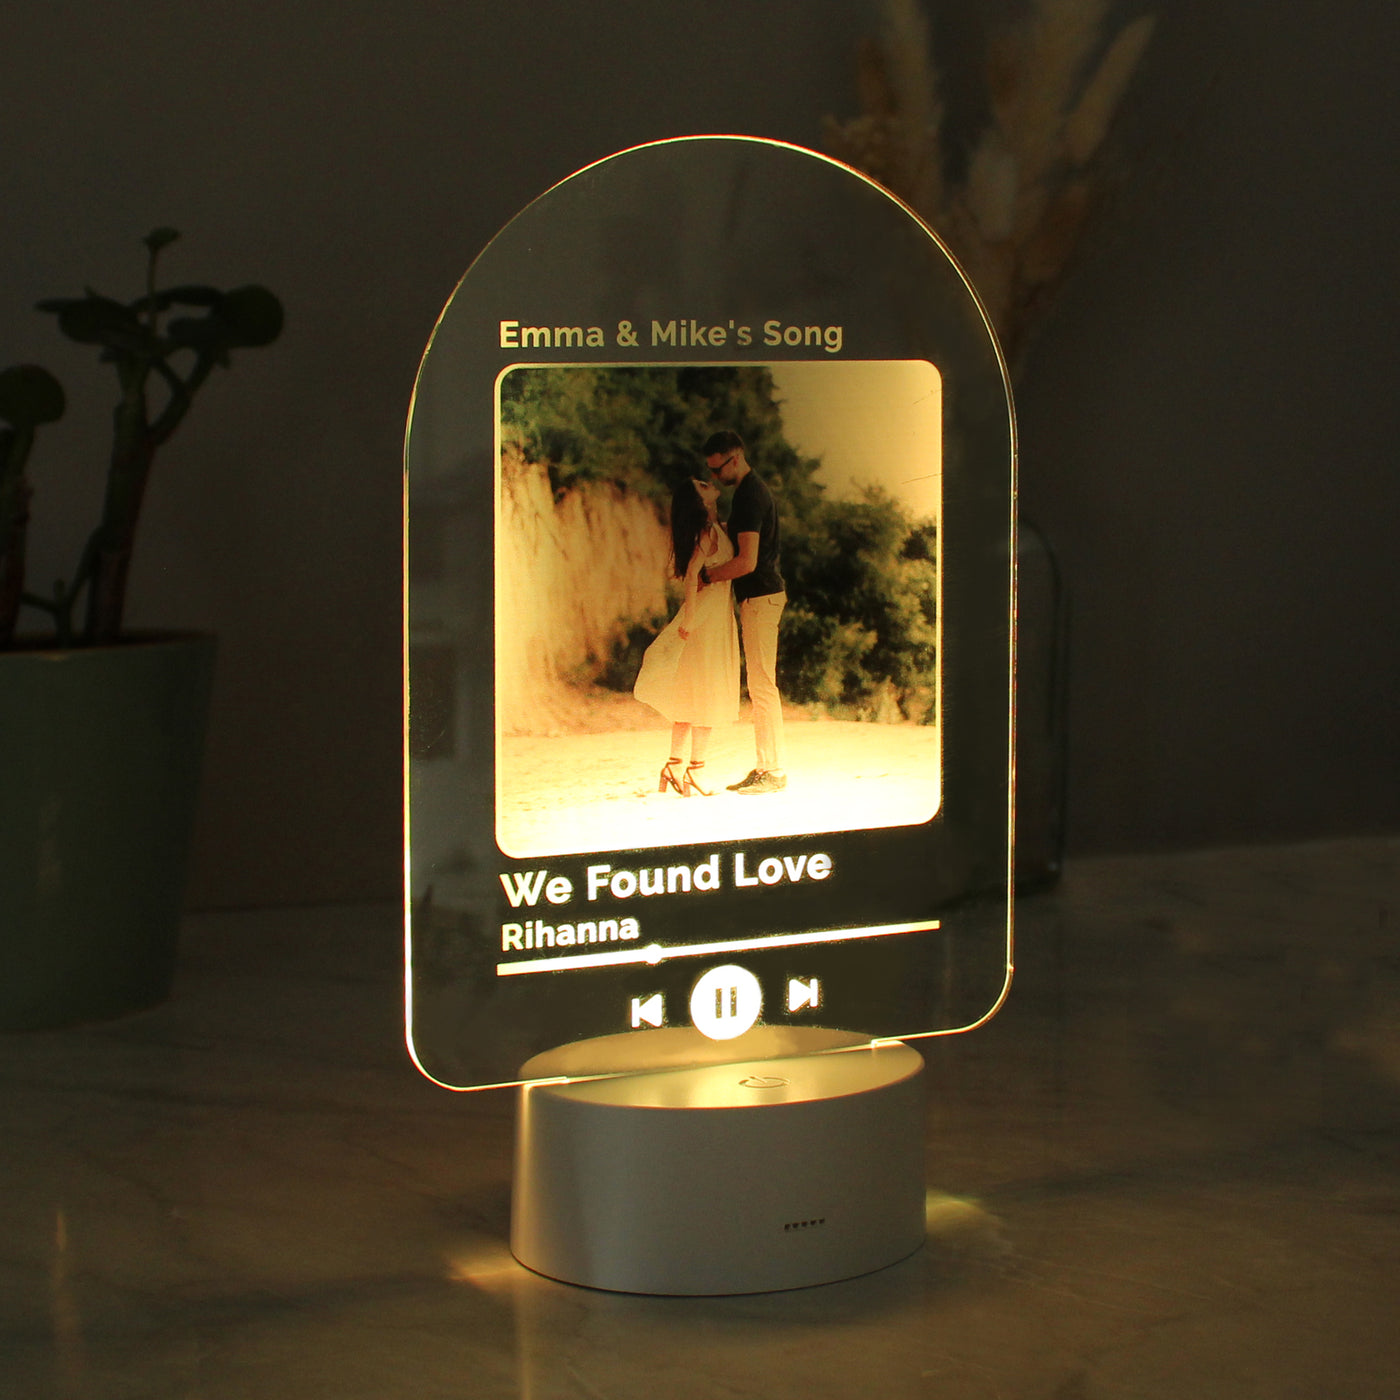 Personalised Any Song LED Colour Changing Light